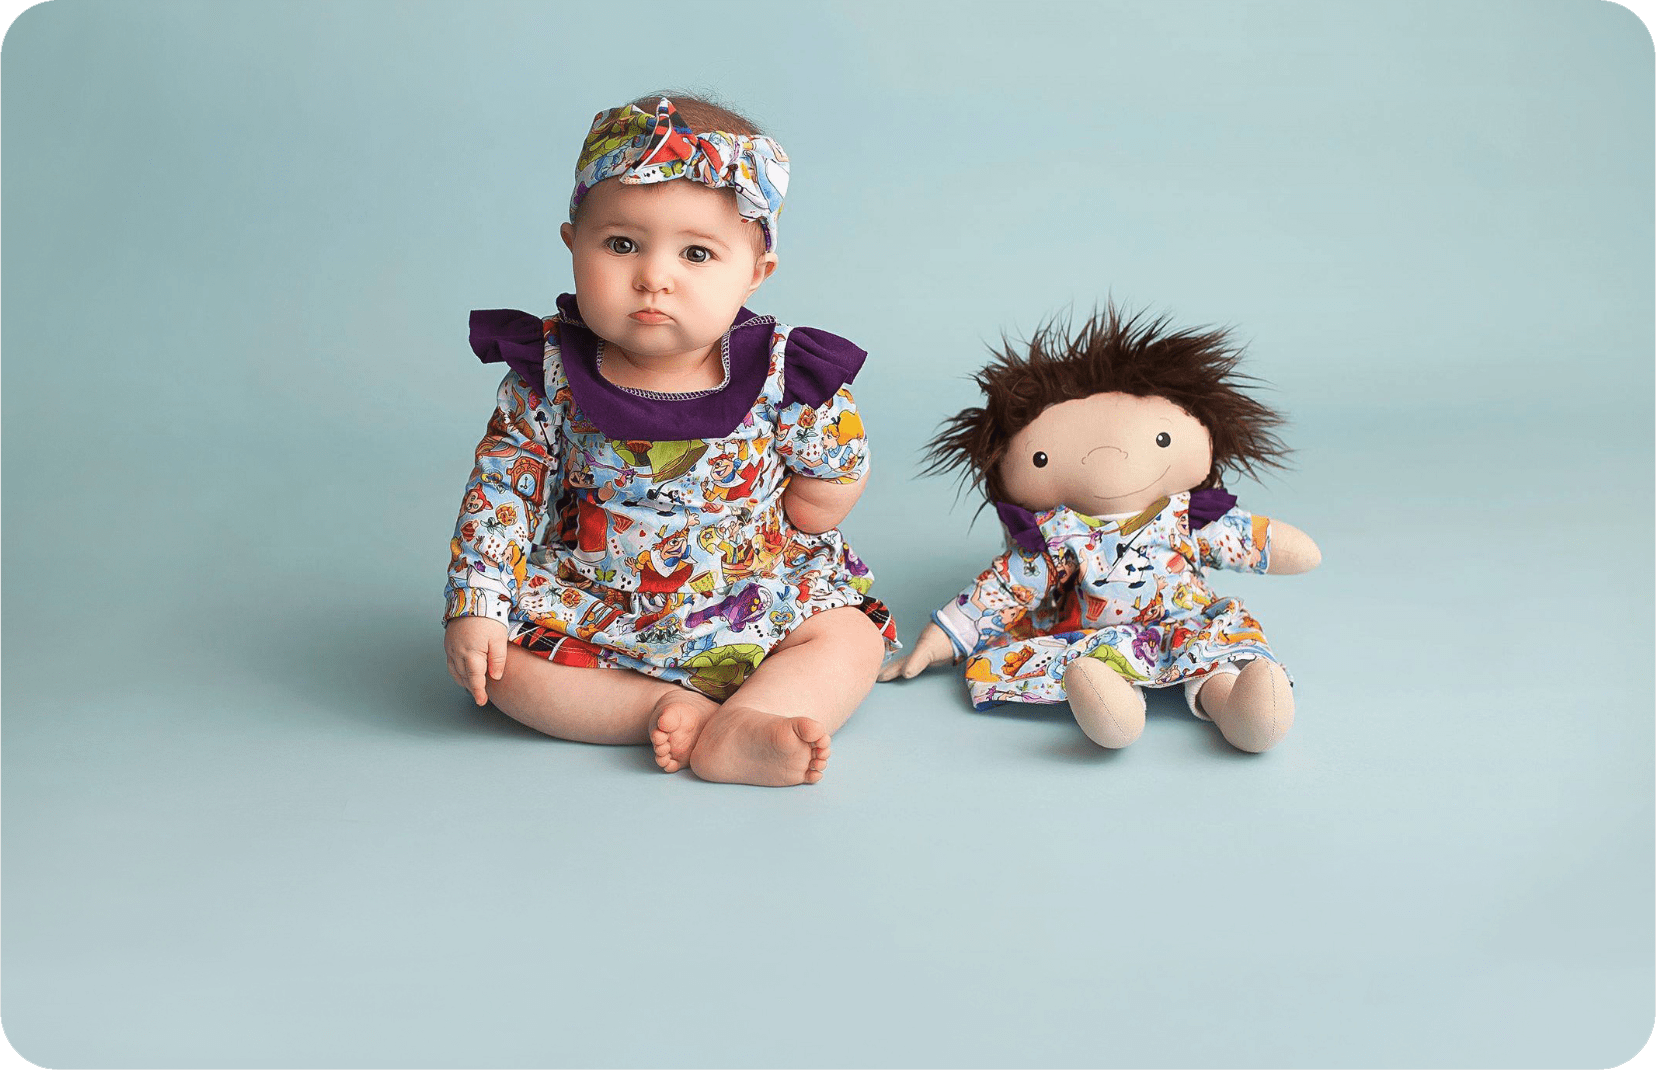 Baby girl with a similar looking doll on her side